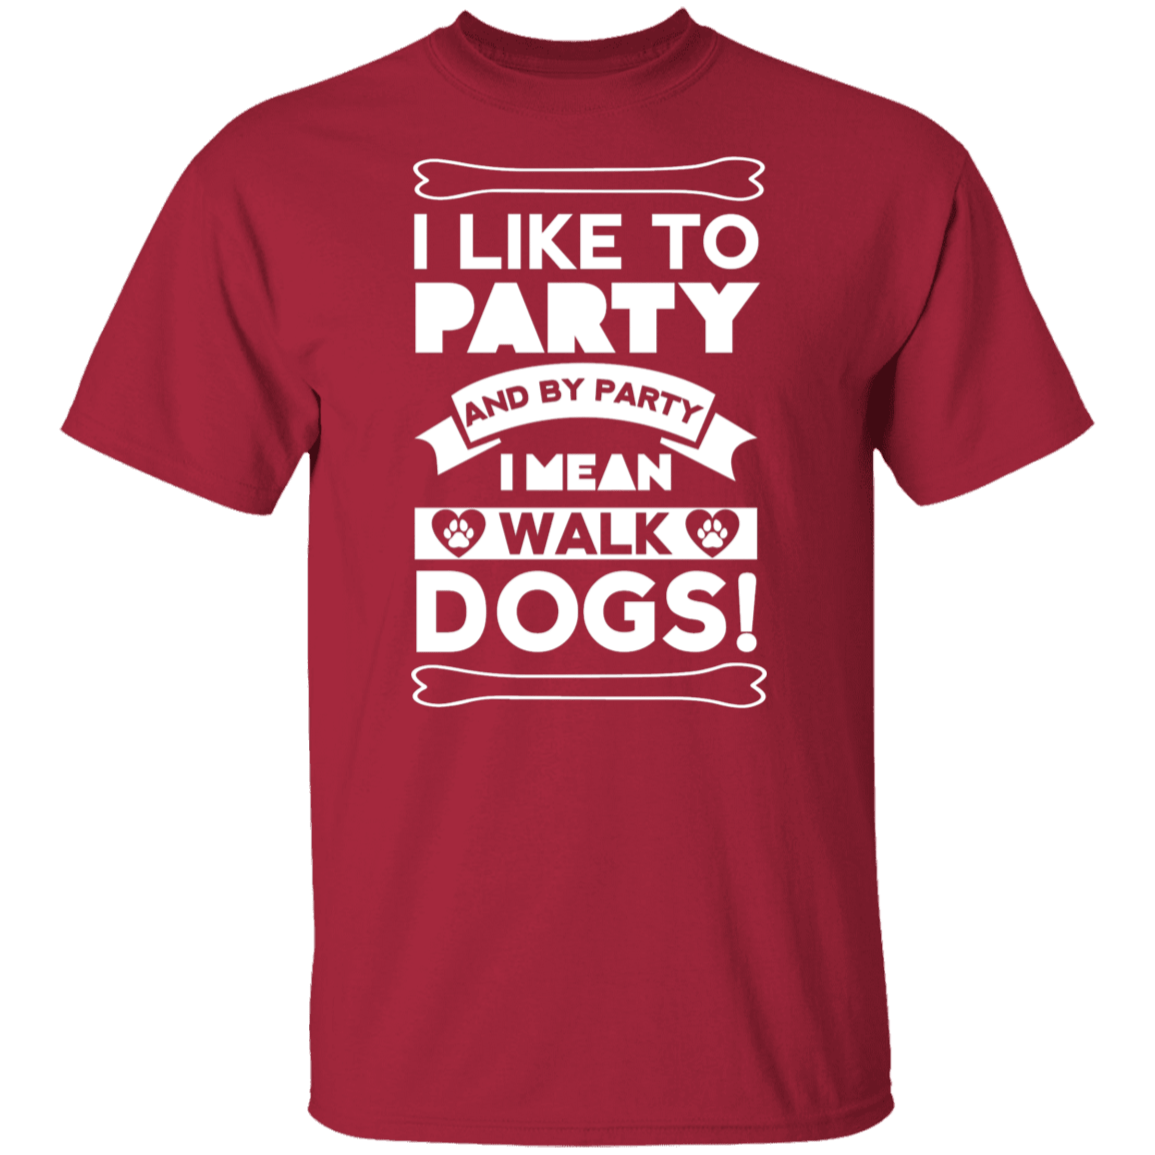 I Like To Party Dogs - T Shirt.